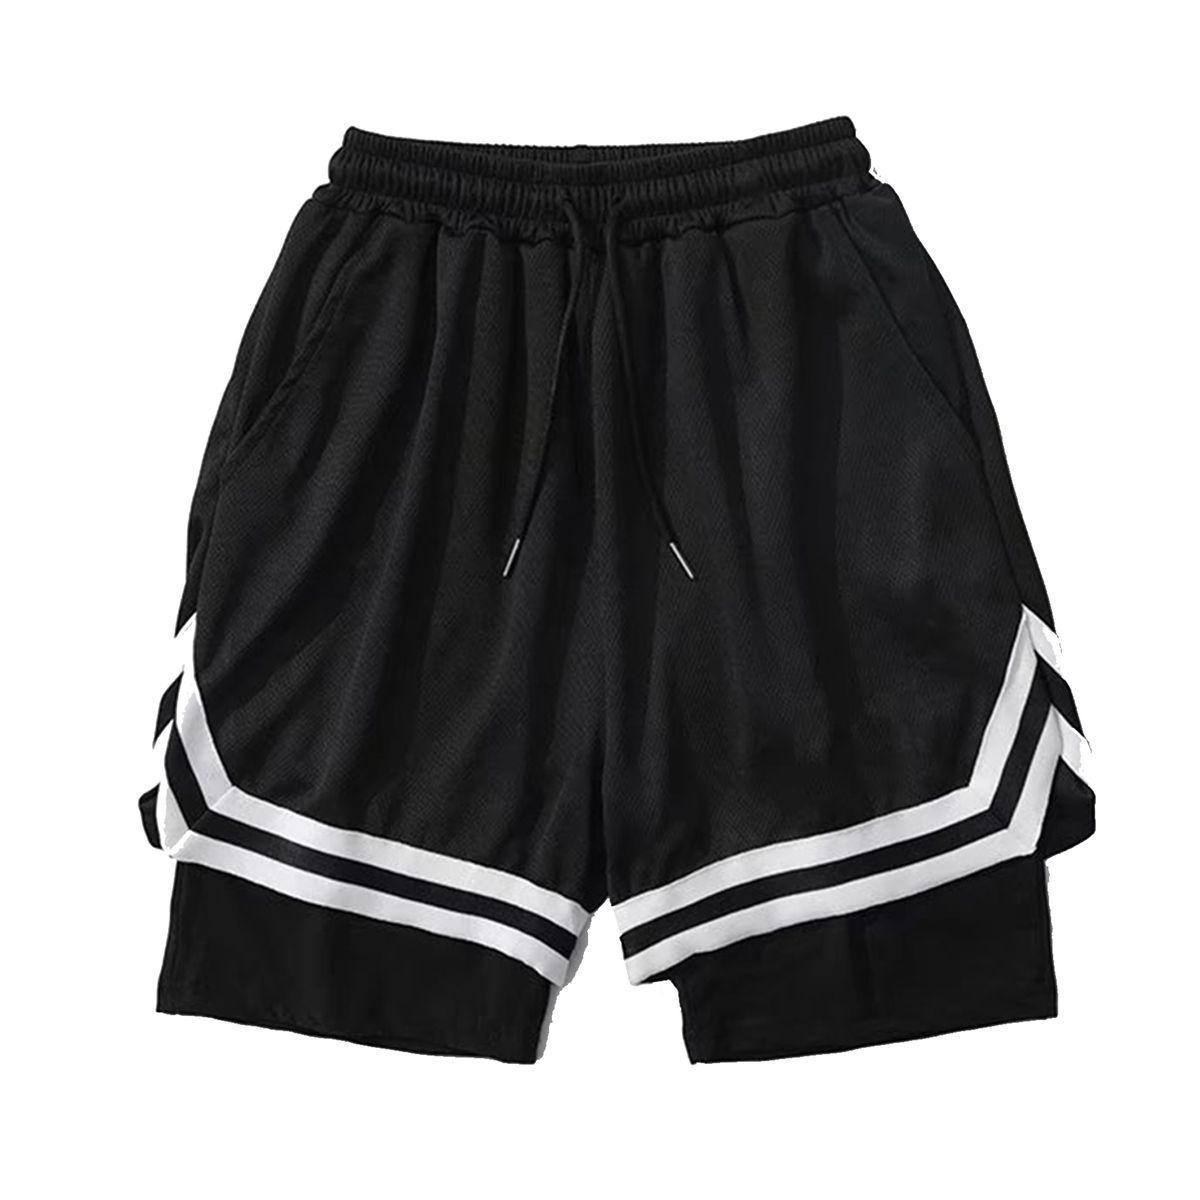 Men 2 Pieces Outdoor Shorts 2 in 1 Quick Dry Basketball Sport Training ...